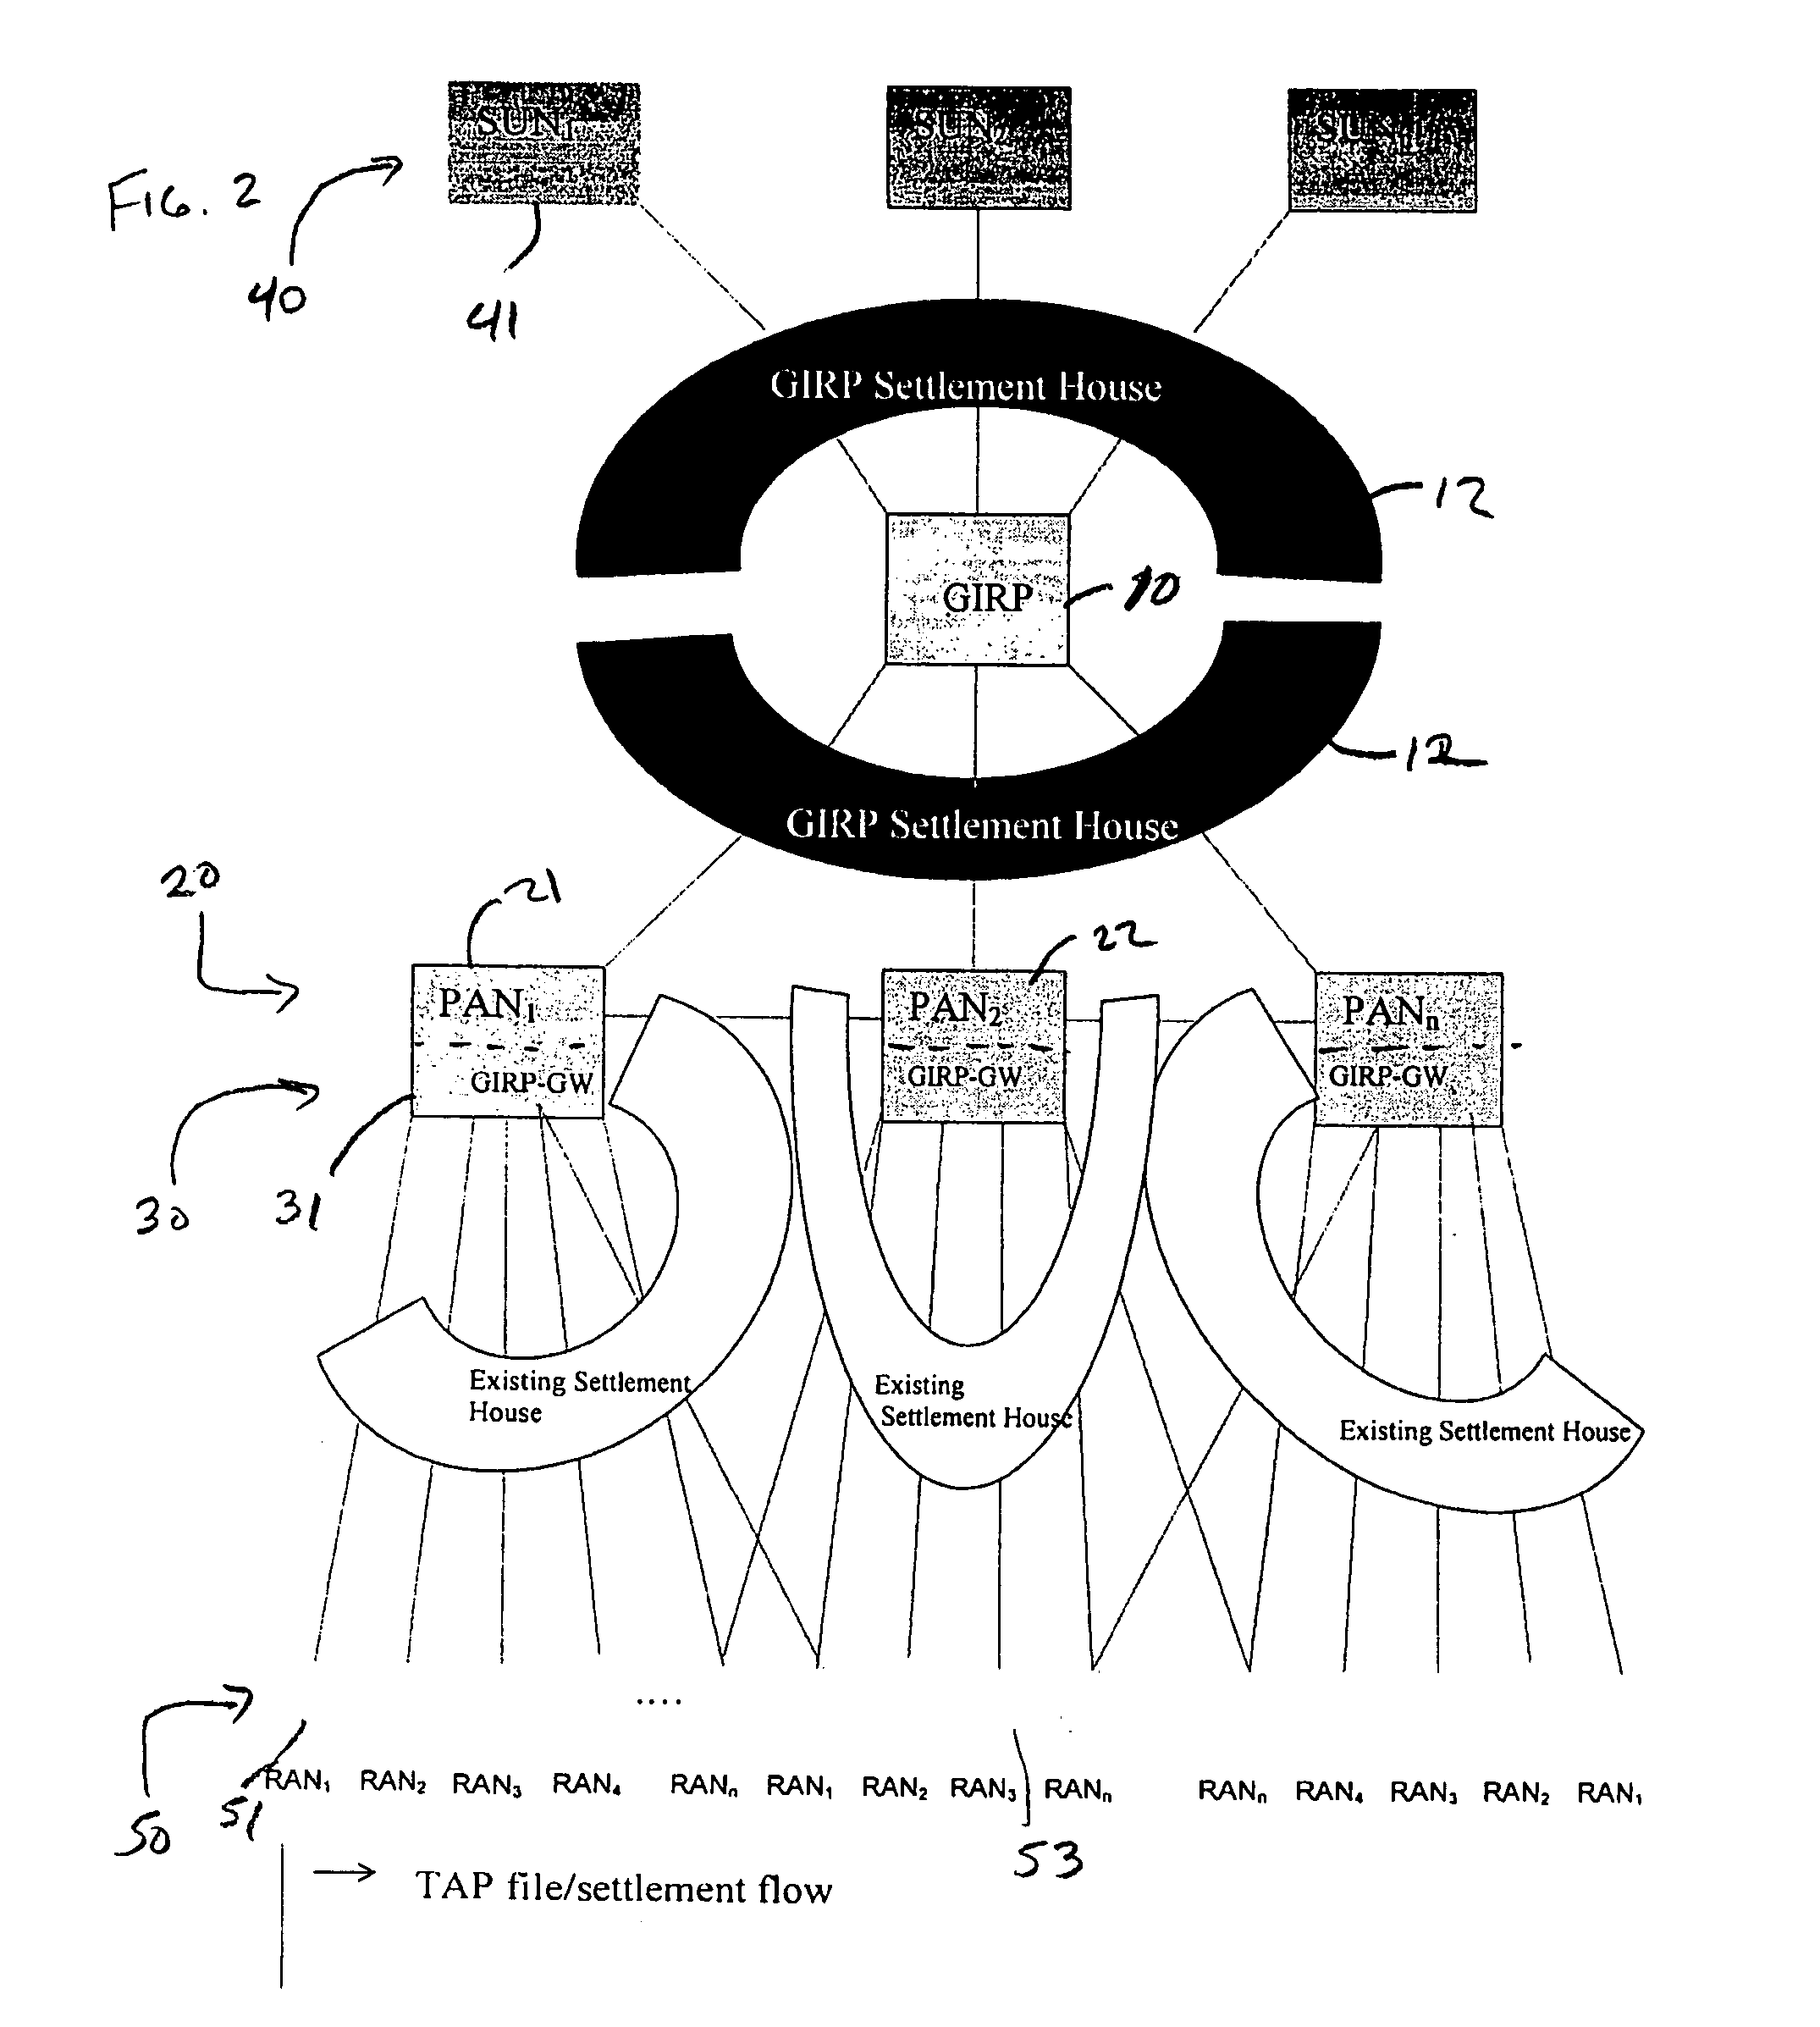 Network-based system and method for global roaming